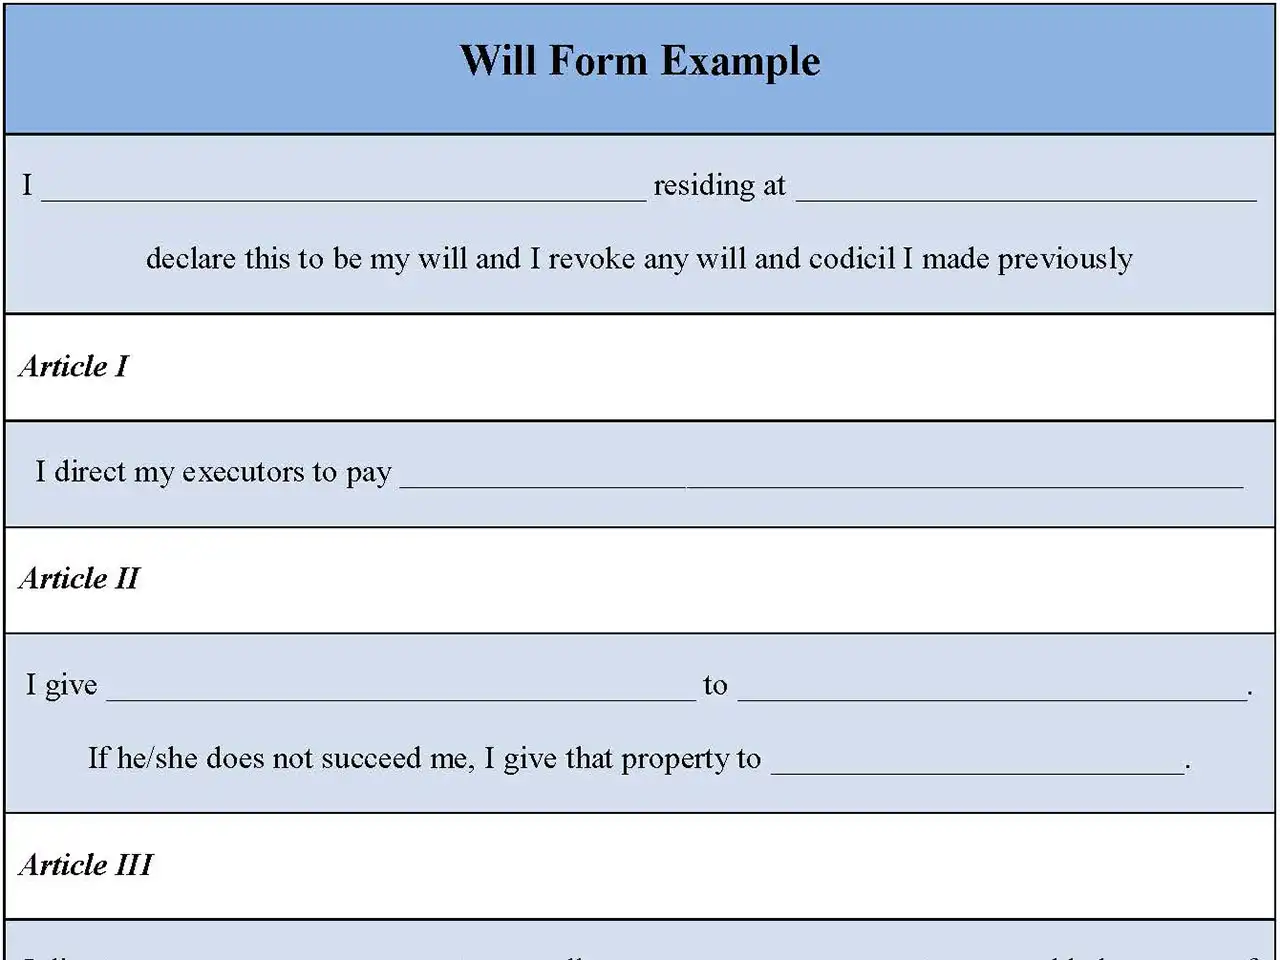 Will Form Example